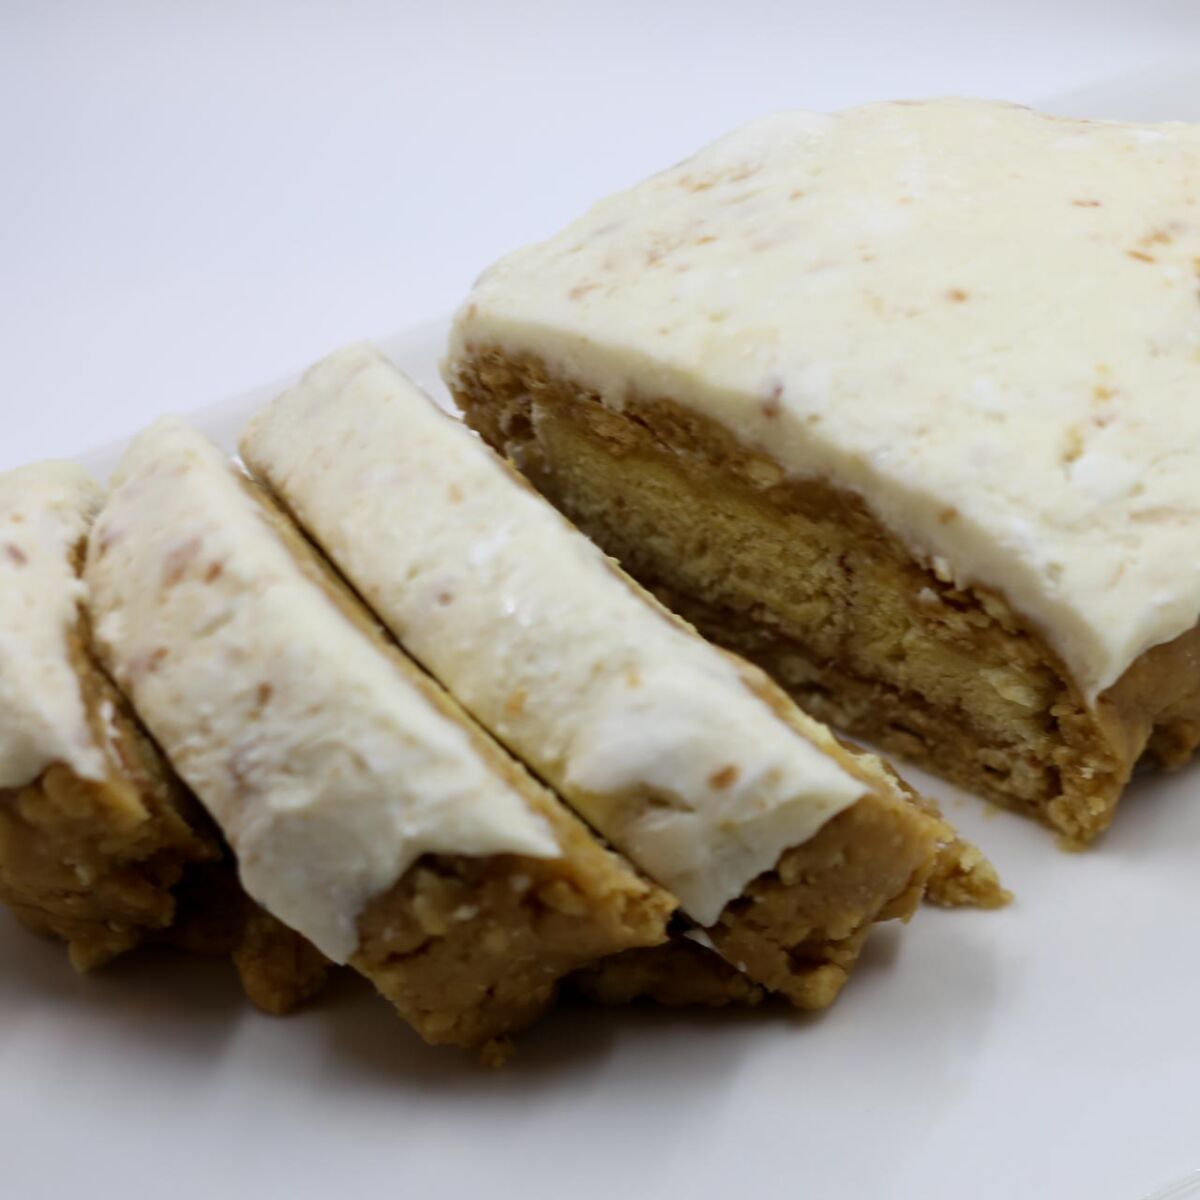 Photo of a sliced tan cake with white frosting